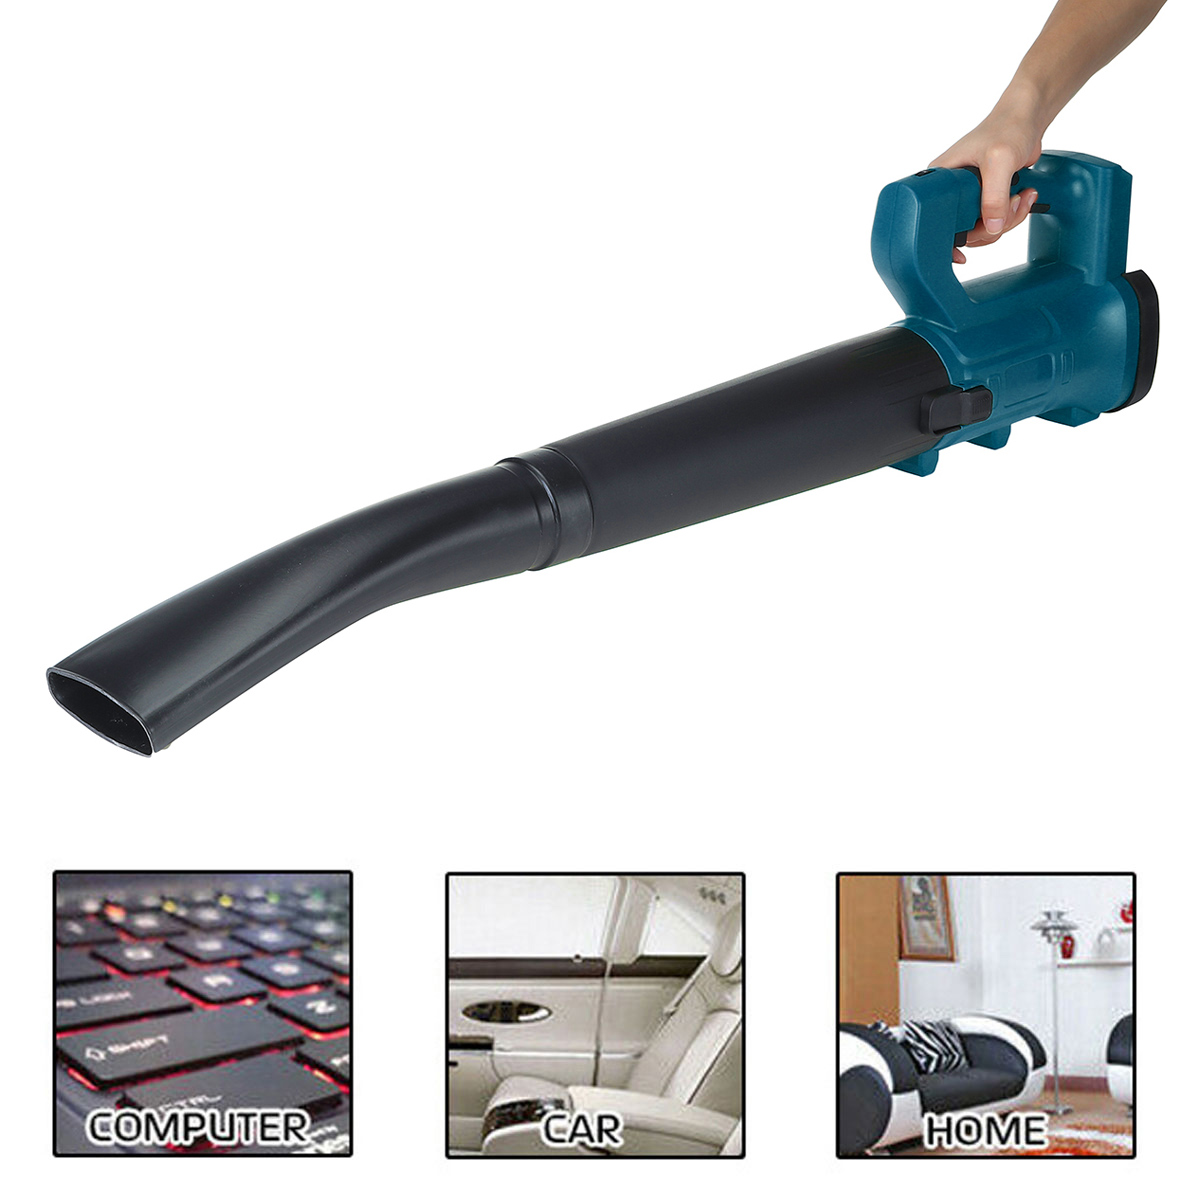 Wolike-2500W-388VF-Cordless-Electric-Air-Blower-Handheld-Leaf-Blower-Dust-Collector-Sweeper-Garden-T-1931058-7